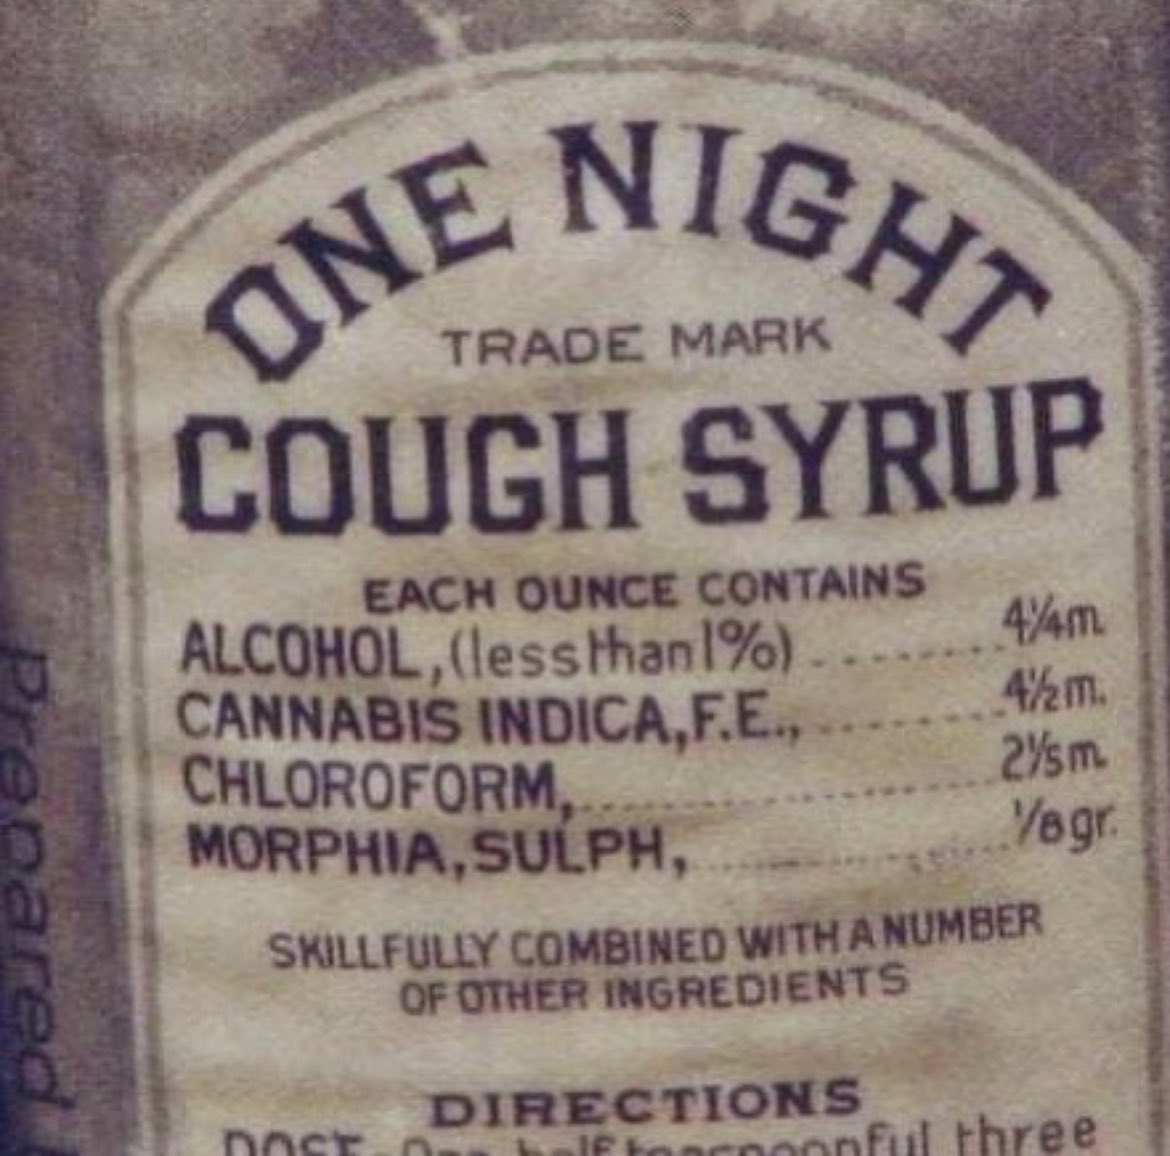 In 1888, cough syrup produced in Baltimore contained the following ingredients: alcohol, cannabis, chloroform, and morphine. In less than a decade, Bayer successfully synthesized aspirin and heroin. Heroin, derived from the German word 'heroisch' meaning 'heroic,' was marketed by